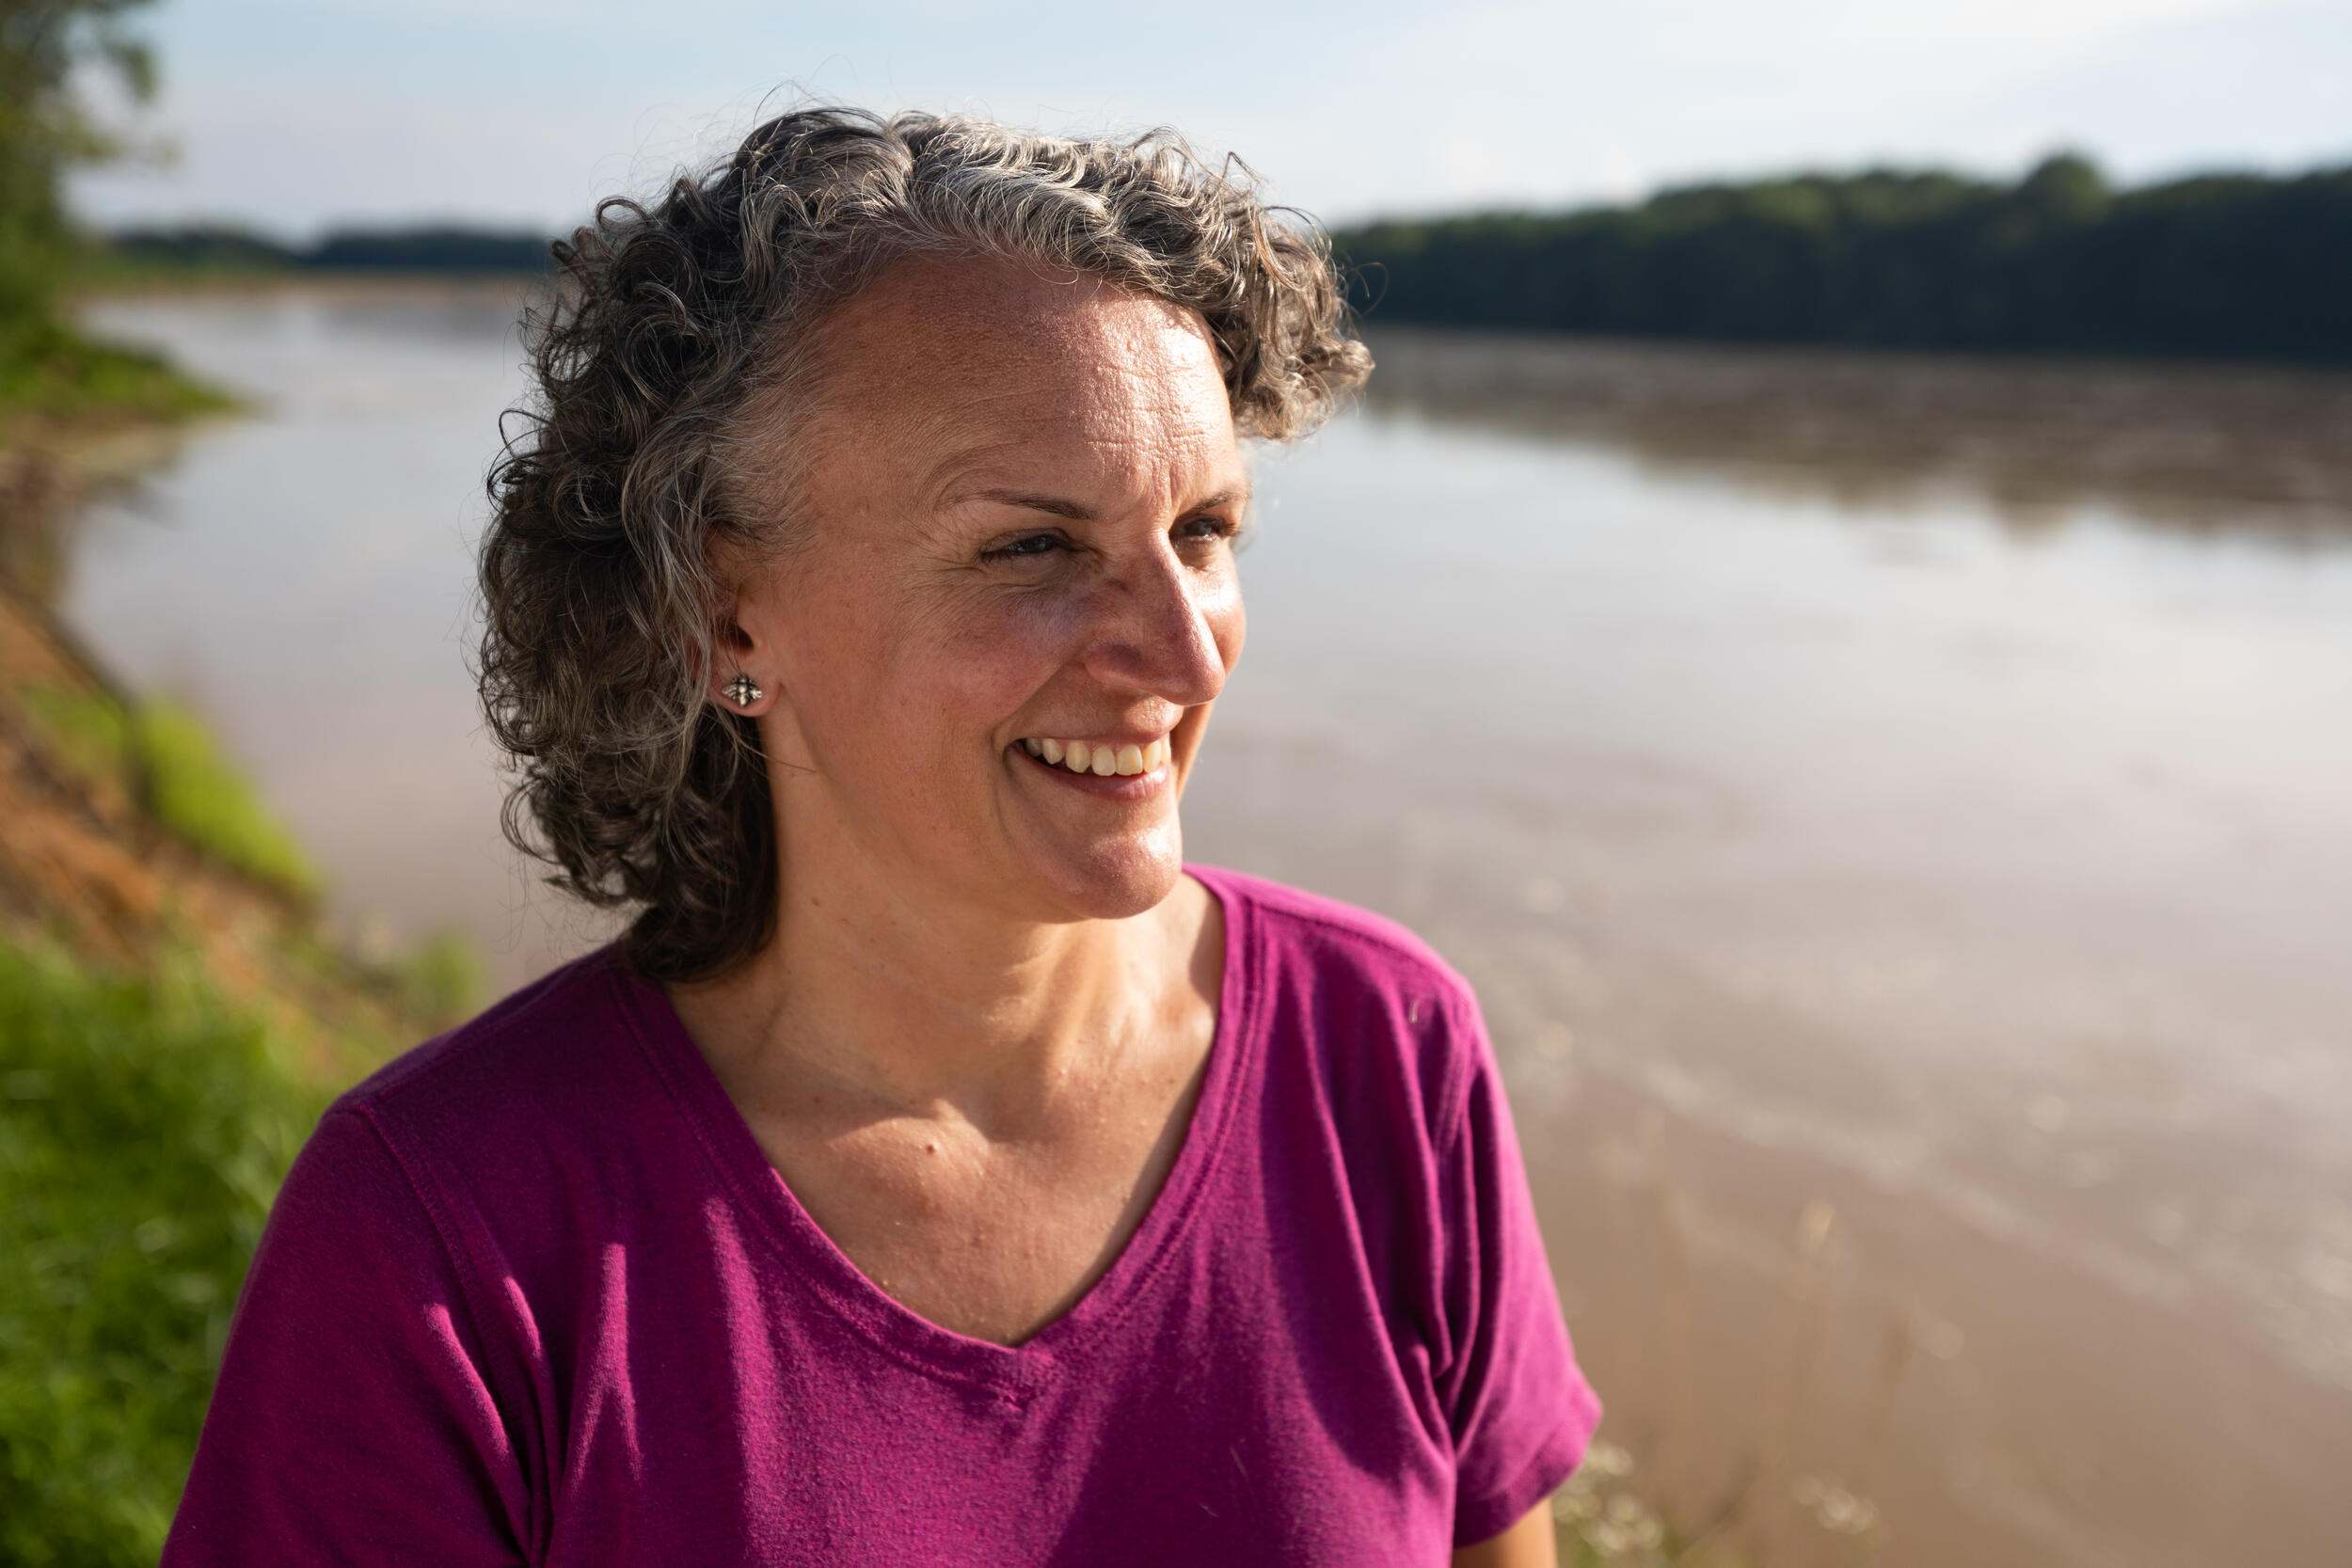 A woman in a maroon shirt standing by a river. 